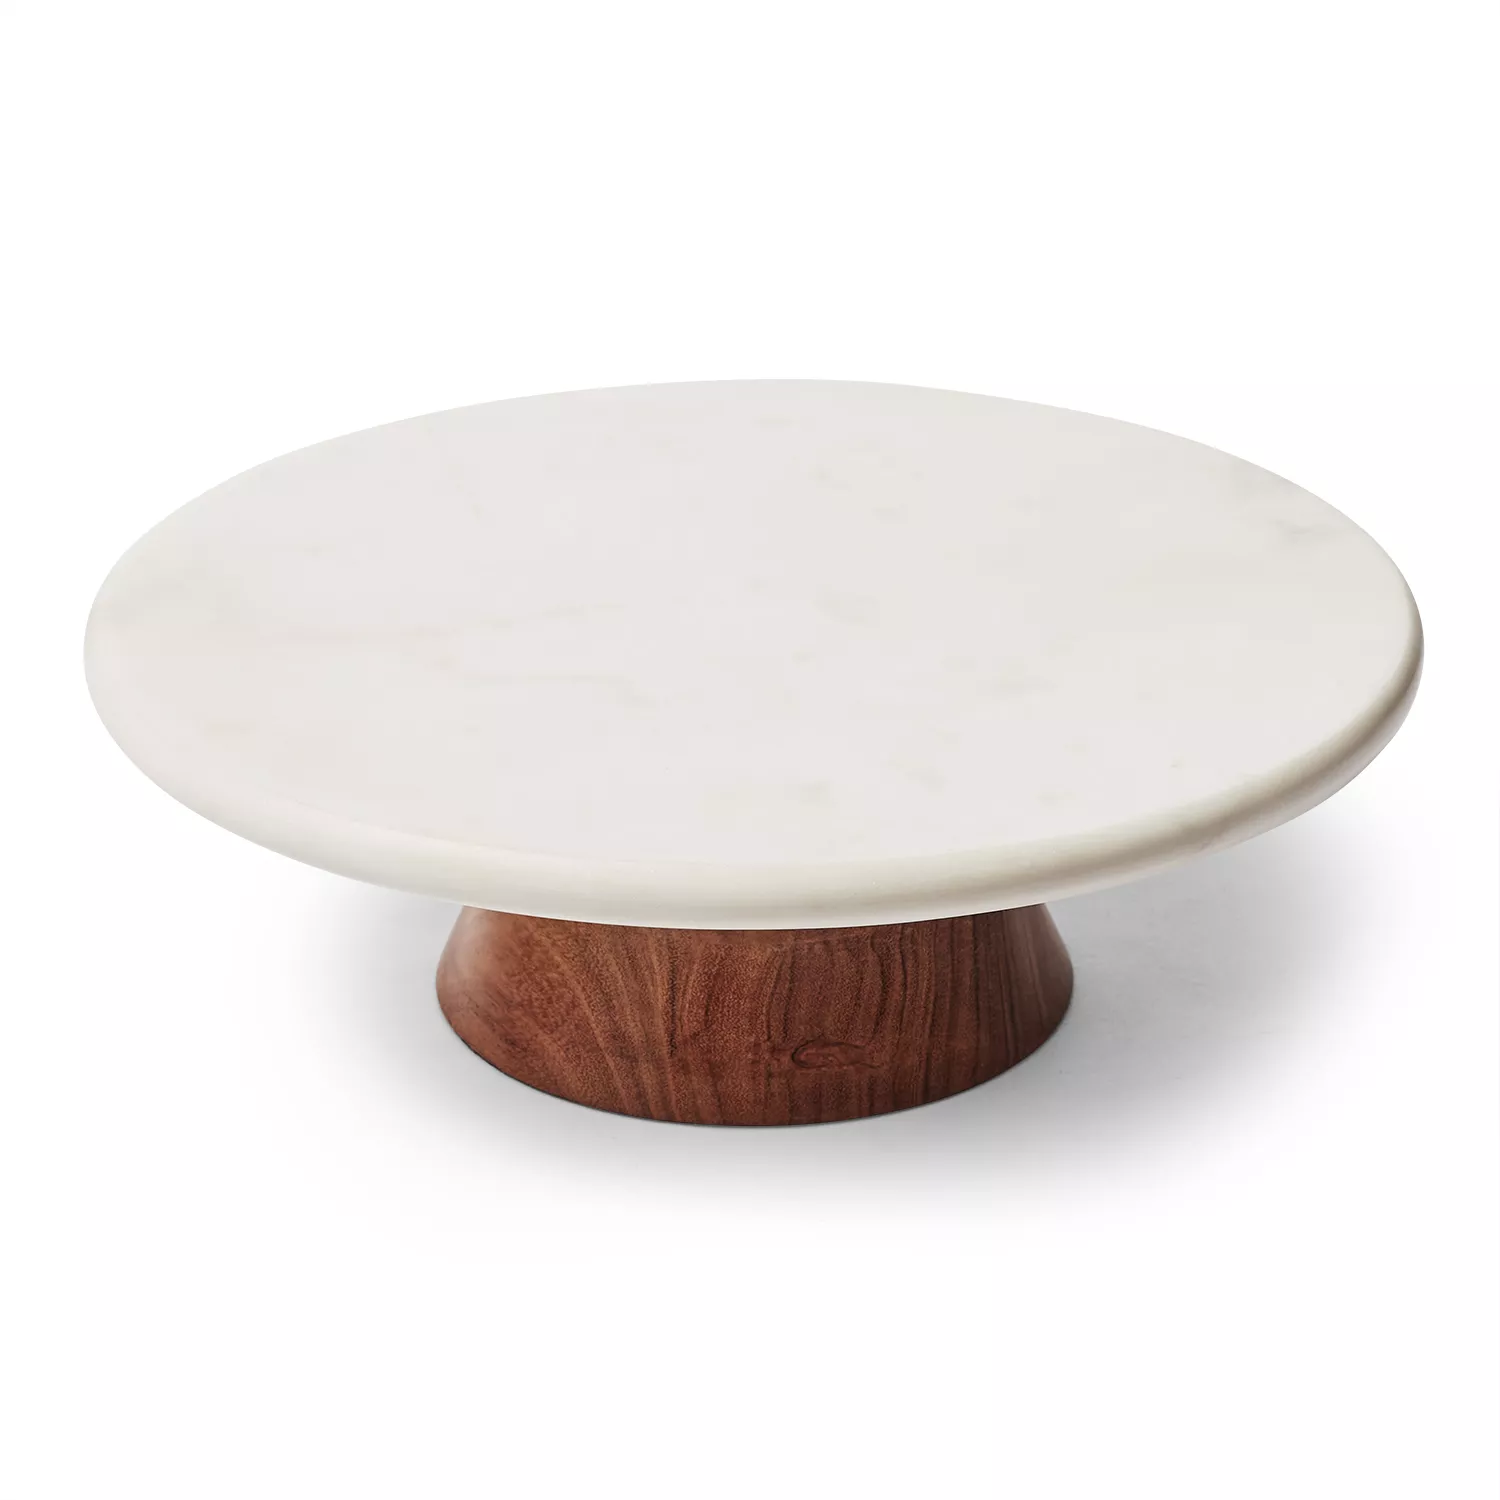 Sur La Table Marble Rotating Cake Stand, White Marble